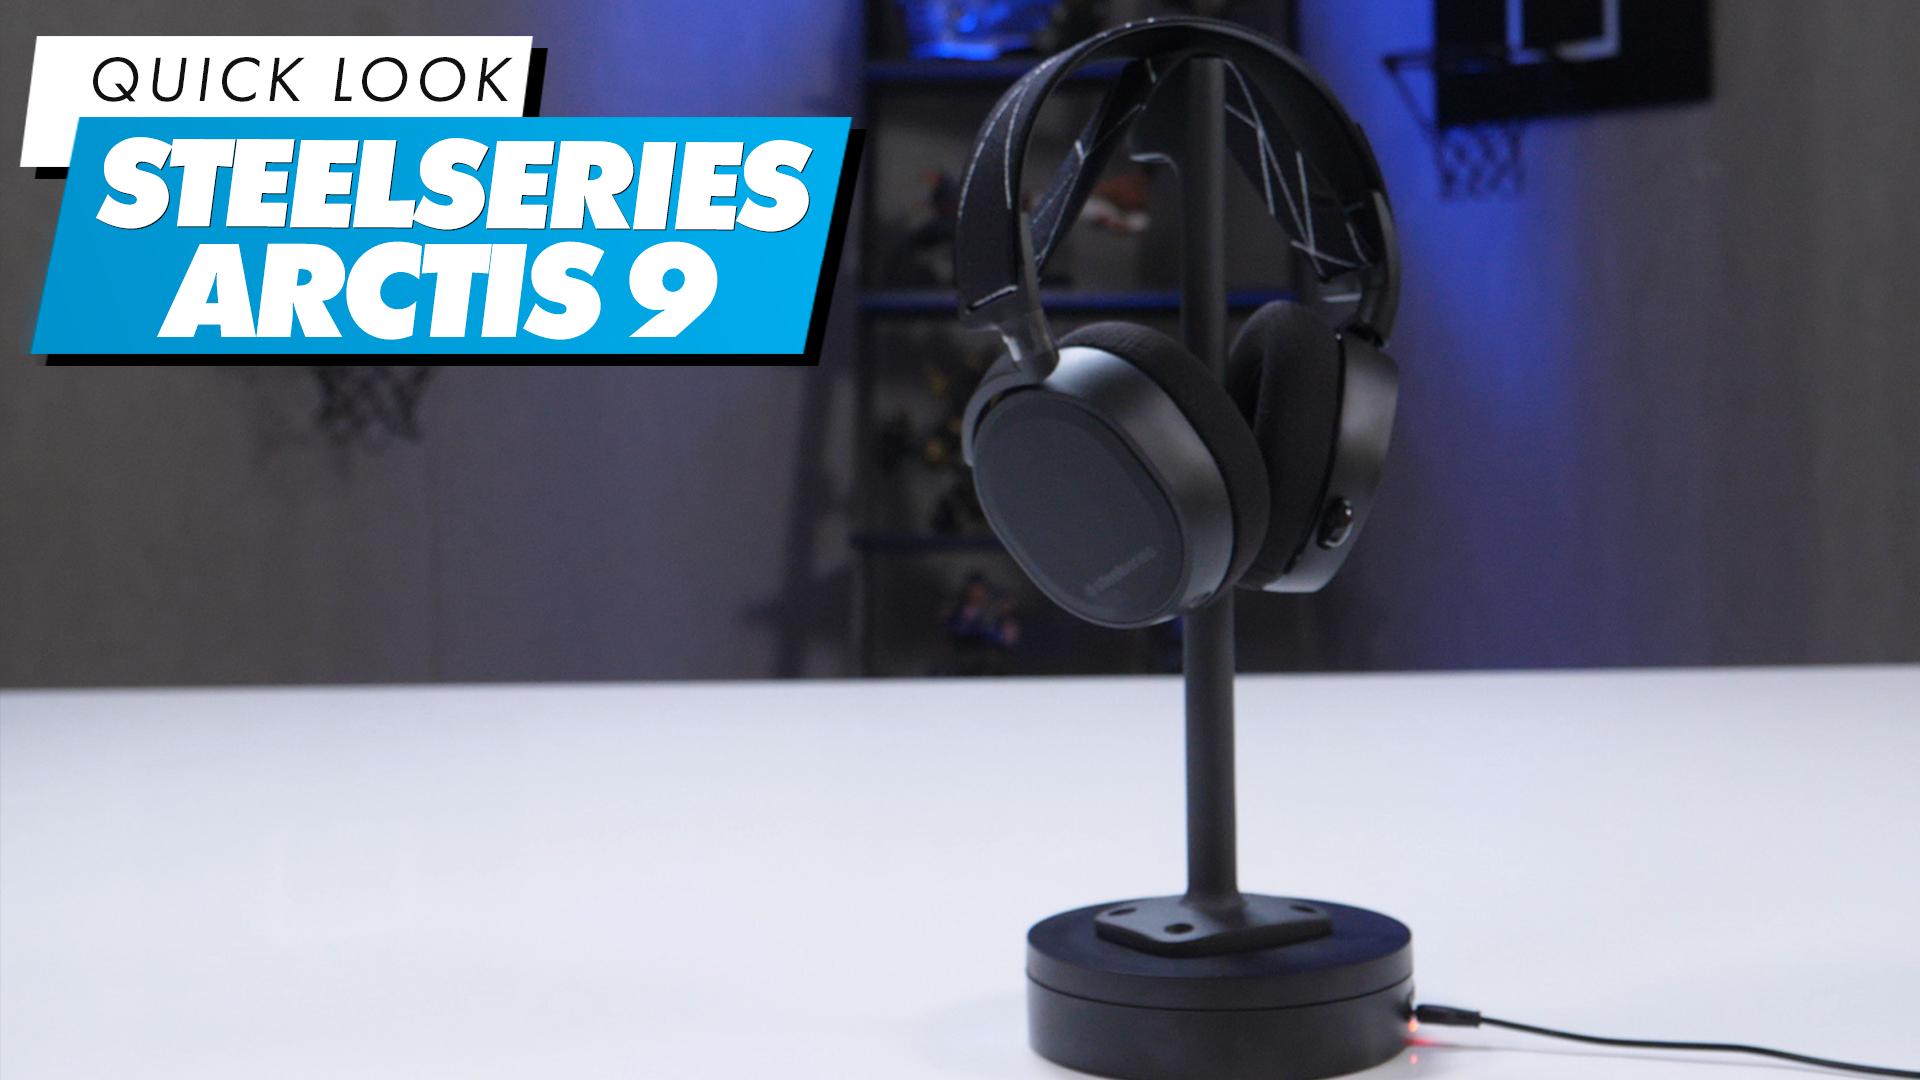 The Arctis 9 is the latest headset from SteelSeries - - Gamereactor